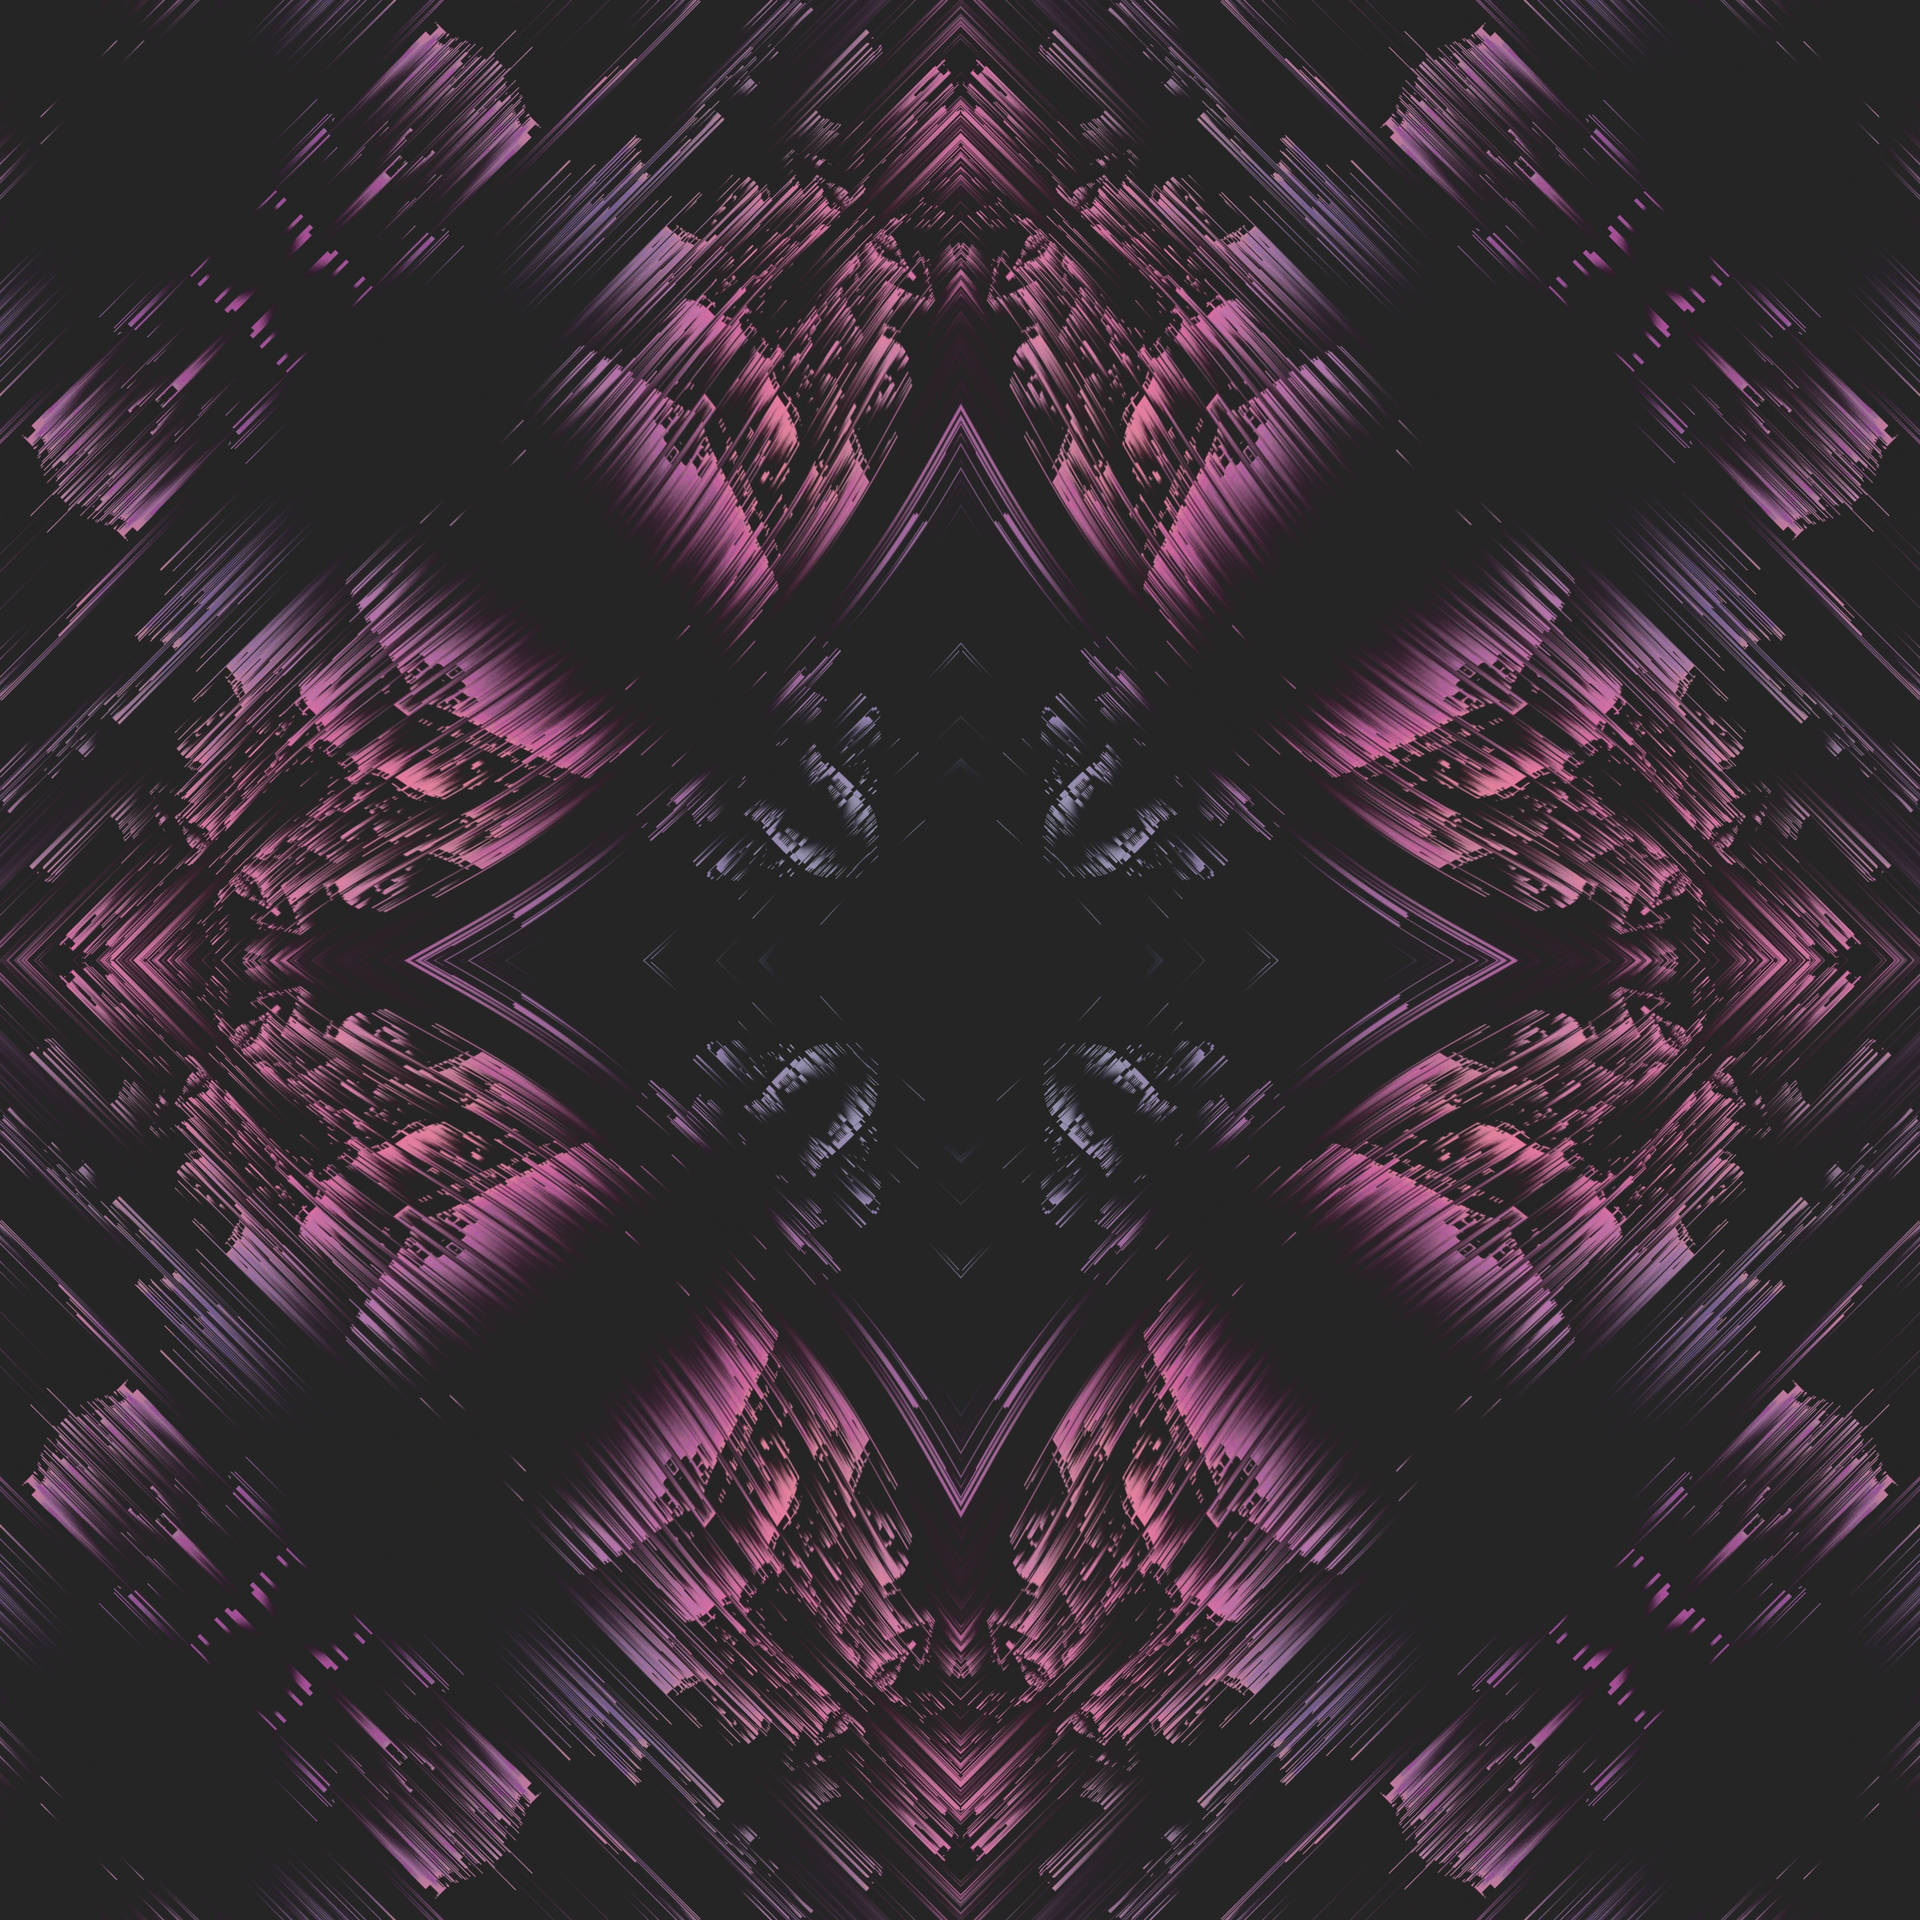 Glitch 3464X3464 Wallpaper and Background Image